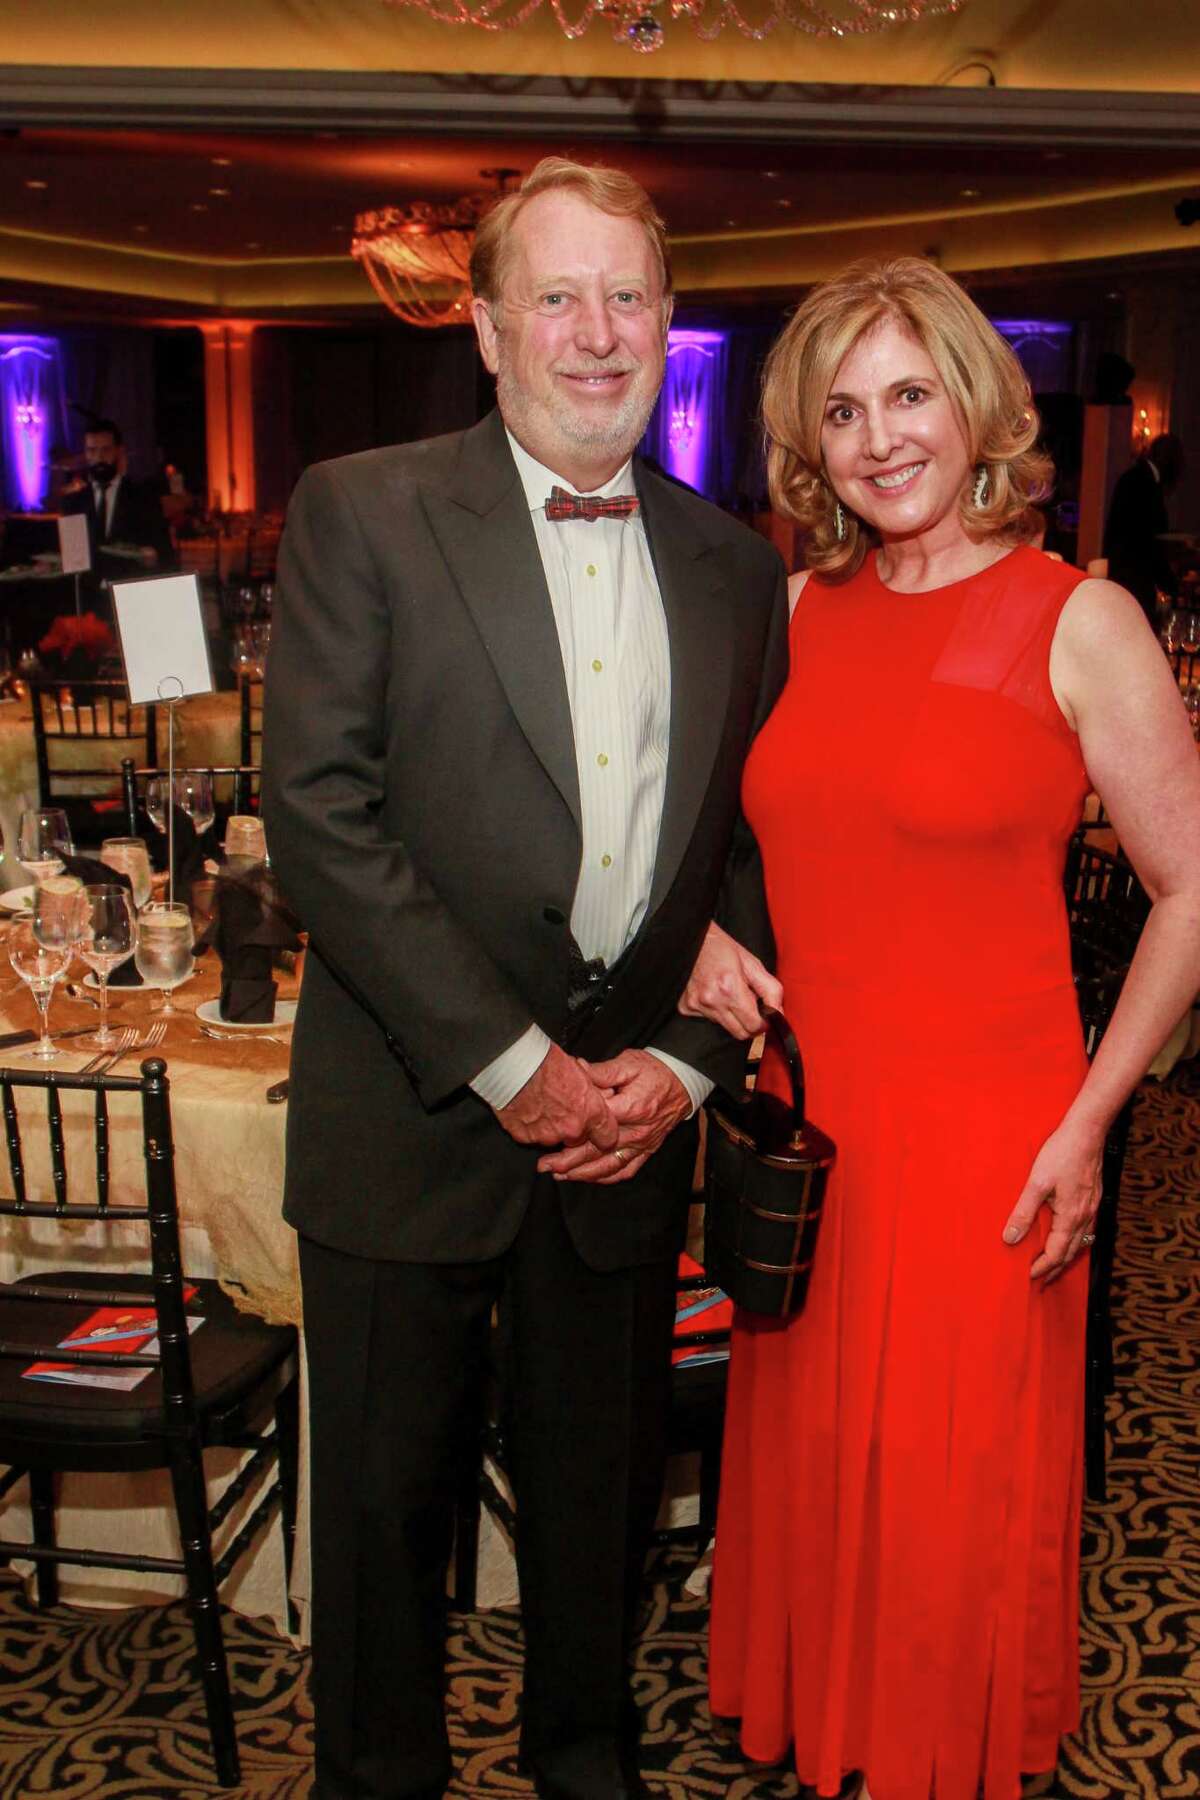 Harrison Williams and Lynn Goode at the Art League Houston Myth & Symbol gala. Lynn is the patron of the year honoree. (For the Chronicle/Gary Fountain, October 13, 2017)